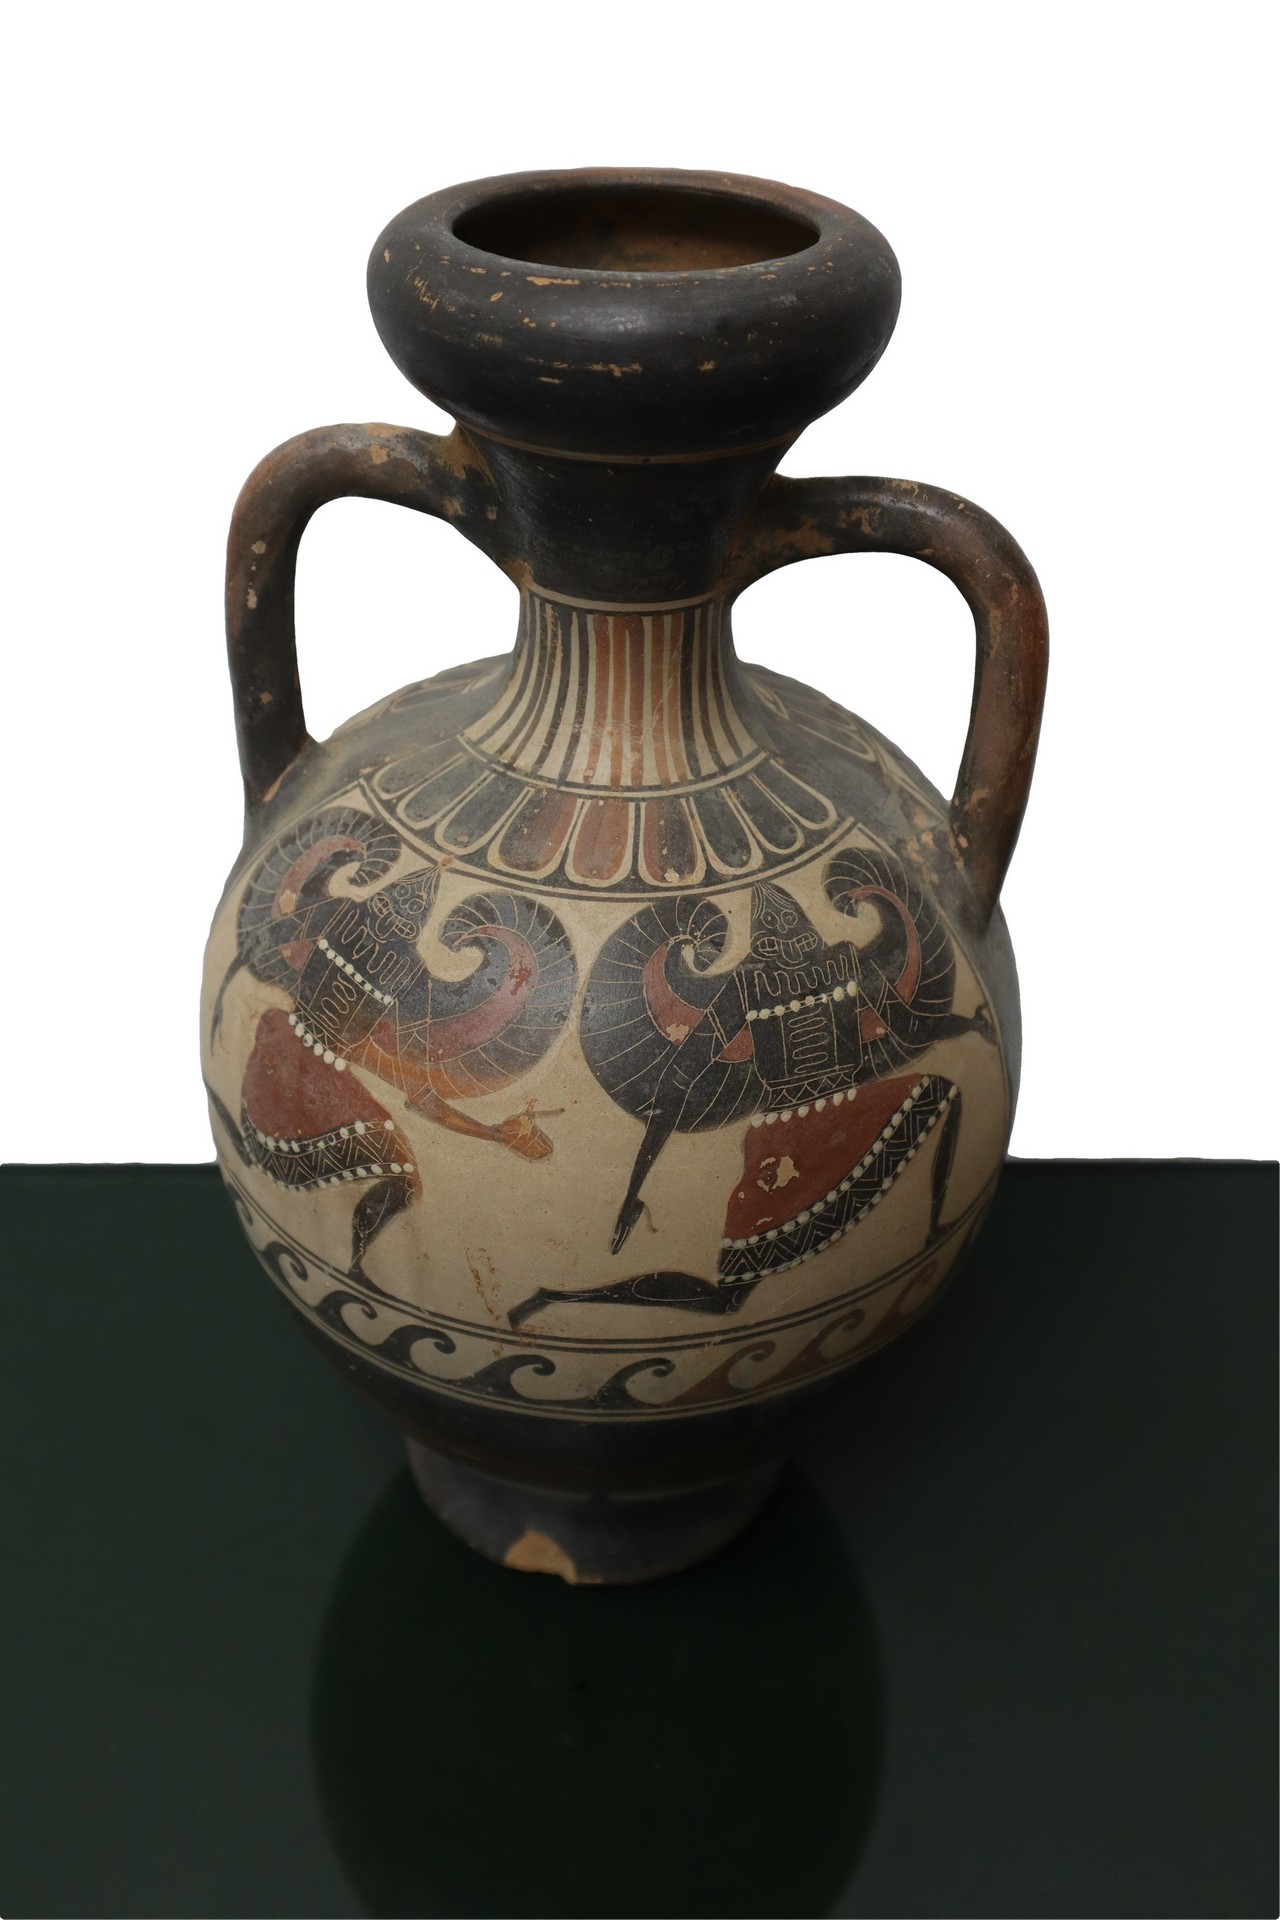 Reproduction of the Panathenaic amphora with two handles - Image 2 of 5